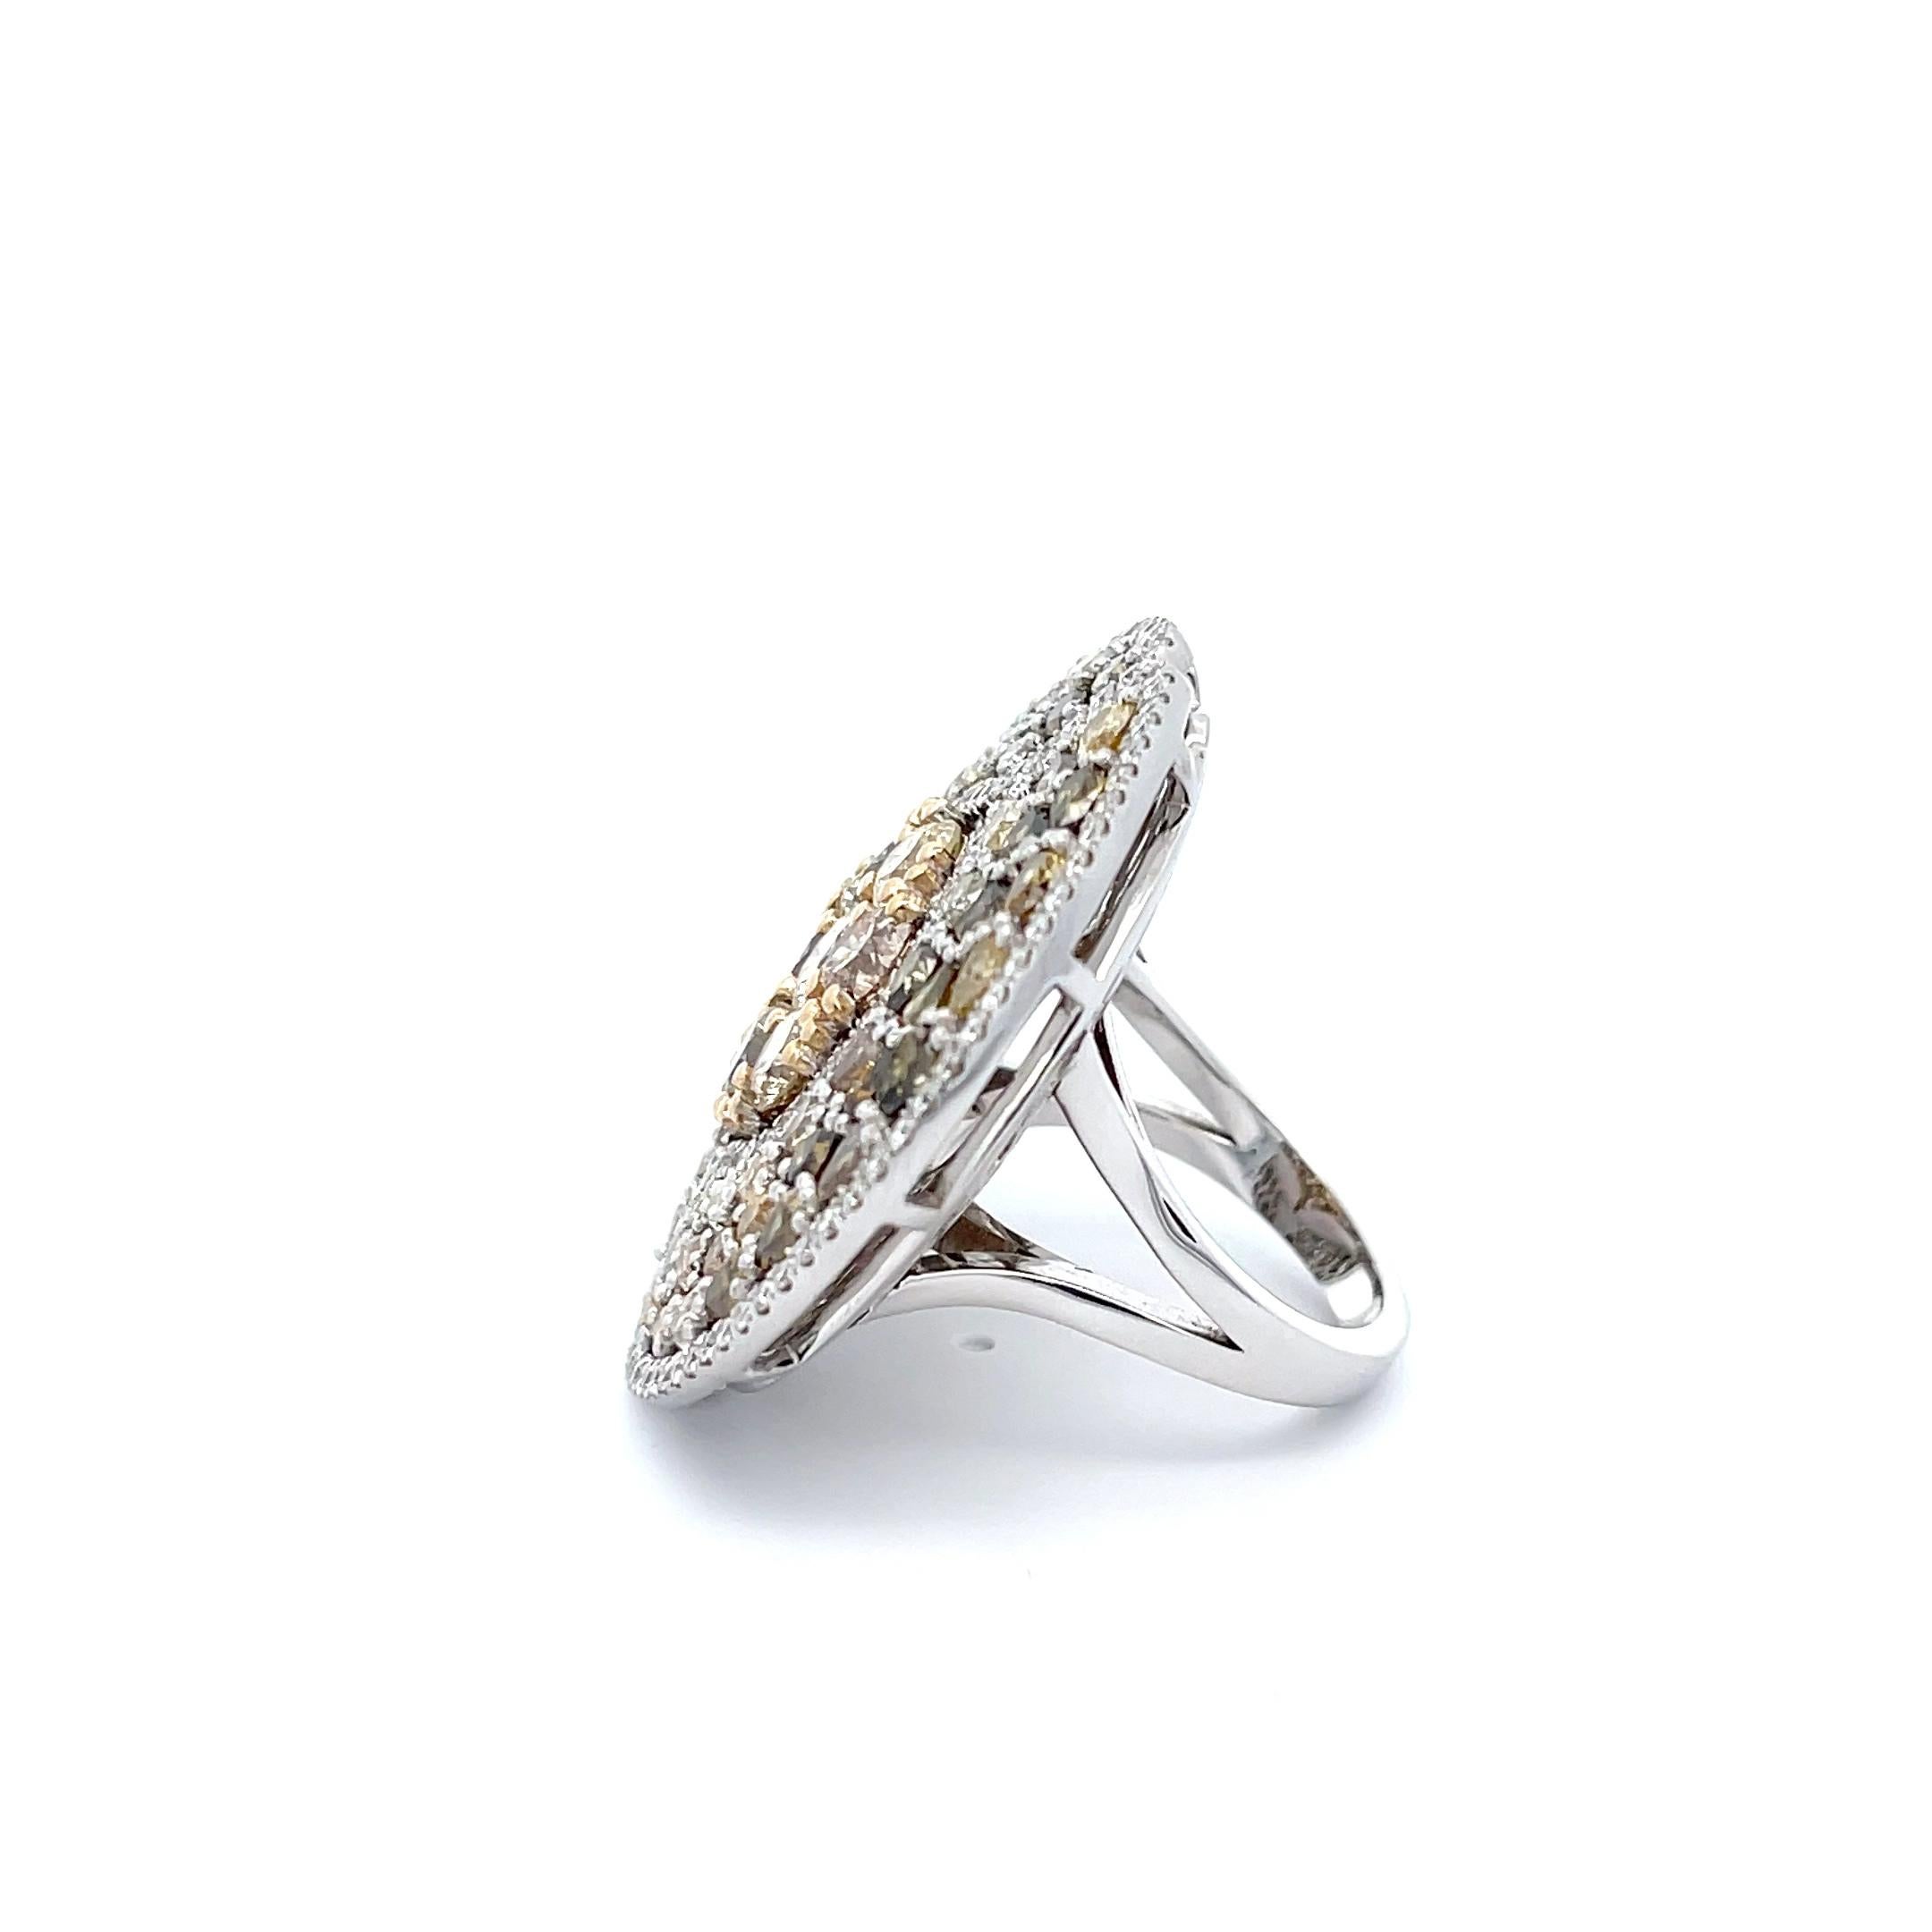 Natural Fancy Diamond '12ctw' Cocktail Ring 14k White Gold In Excellent Condition For Sale In Dallas, TX